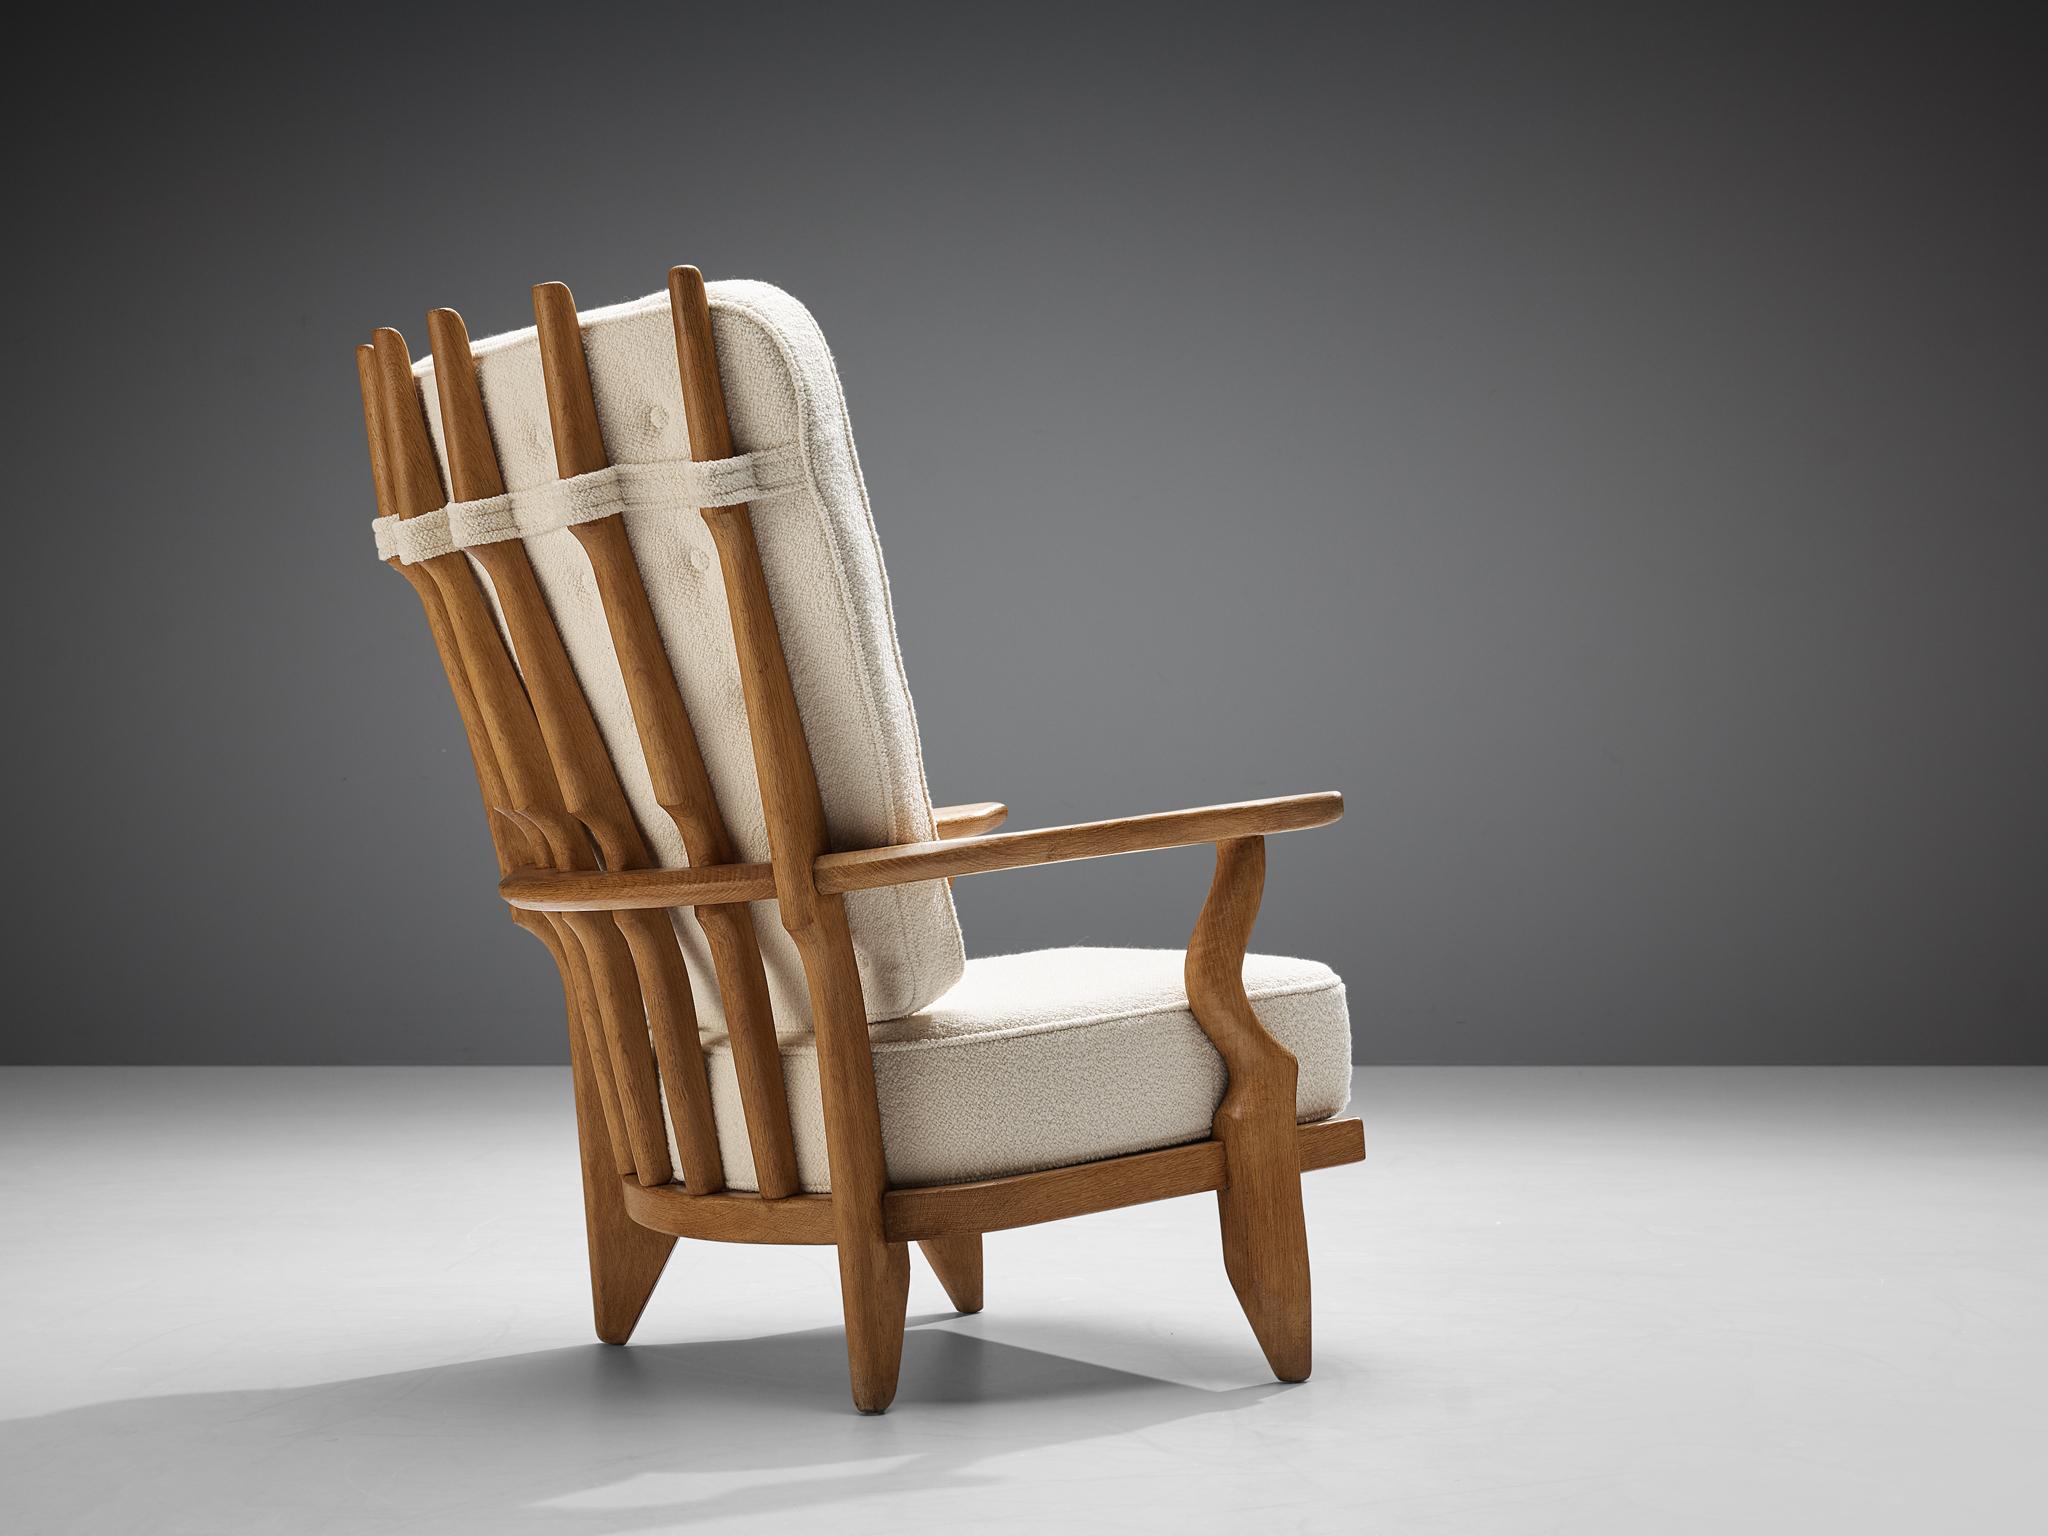 Guillerme et Chambron for Votre Maison, 'Grand Repos' lounge chair oak, white wool upholstery, oak, France, 1960s.

Guillerme and Chambron are known for their high quality solid oak furniture, from which this is another great example. This chair has